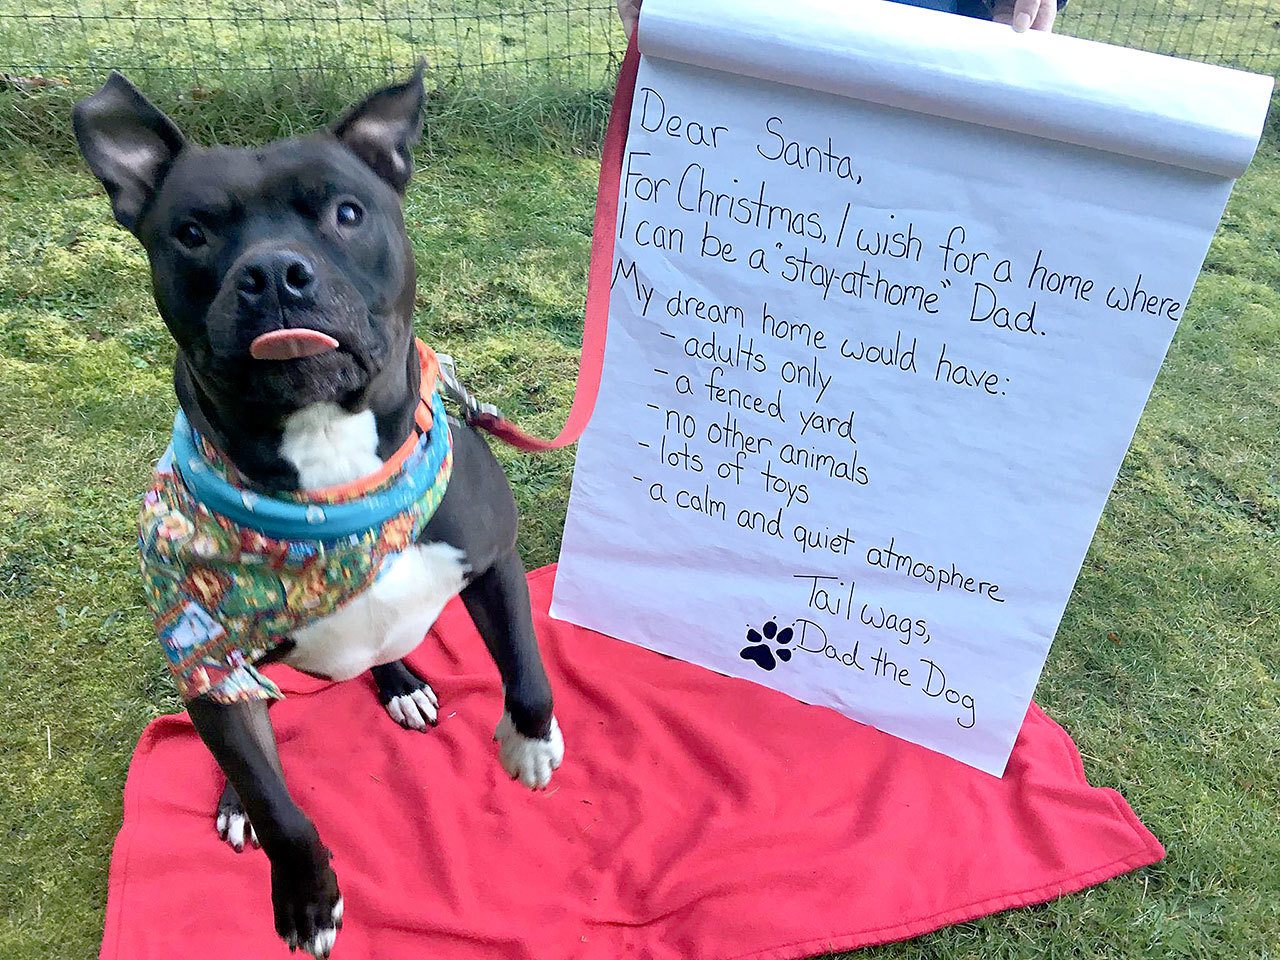 Dad the Dog finally gets his forever home